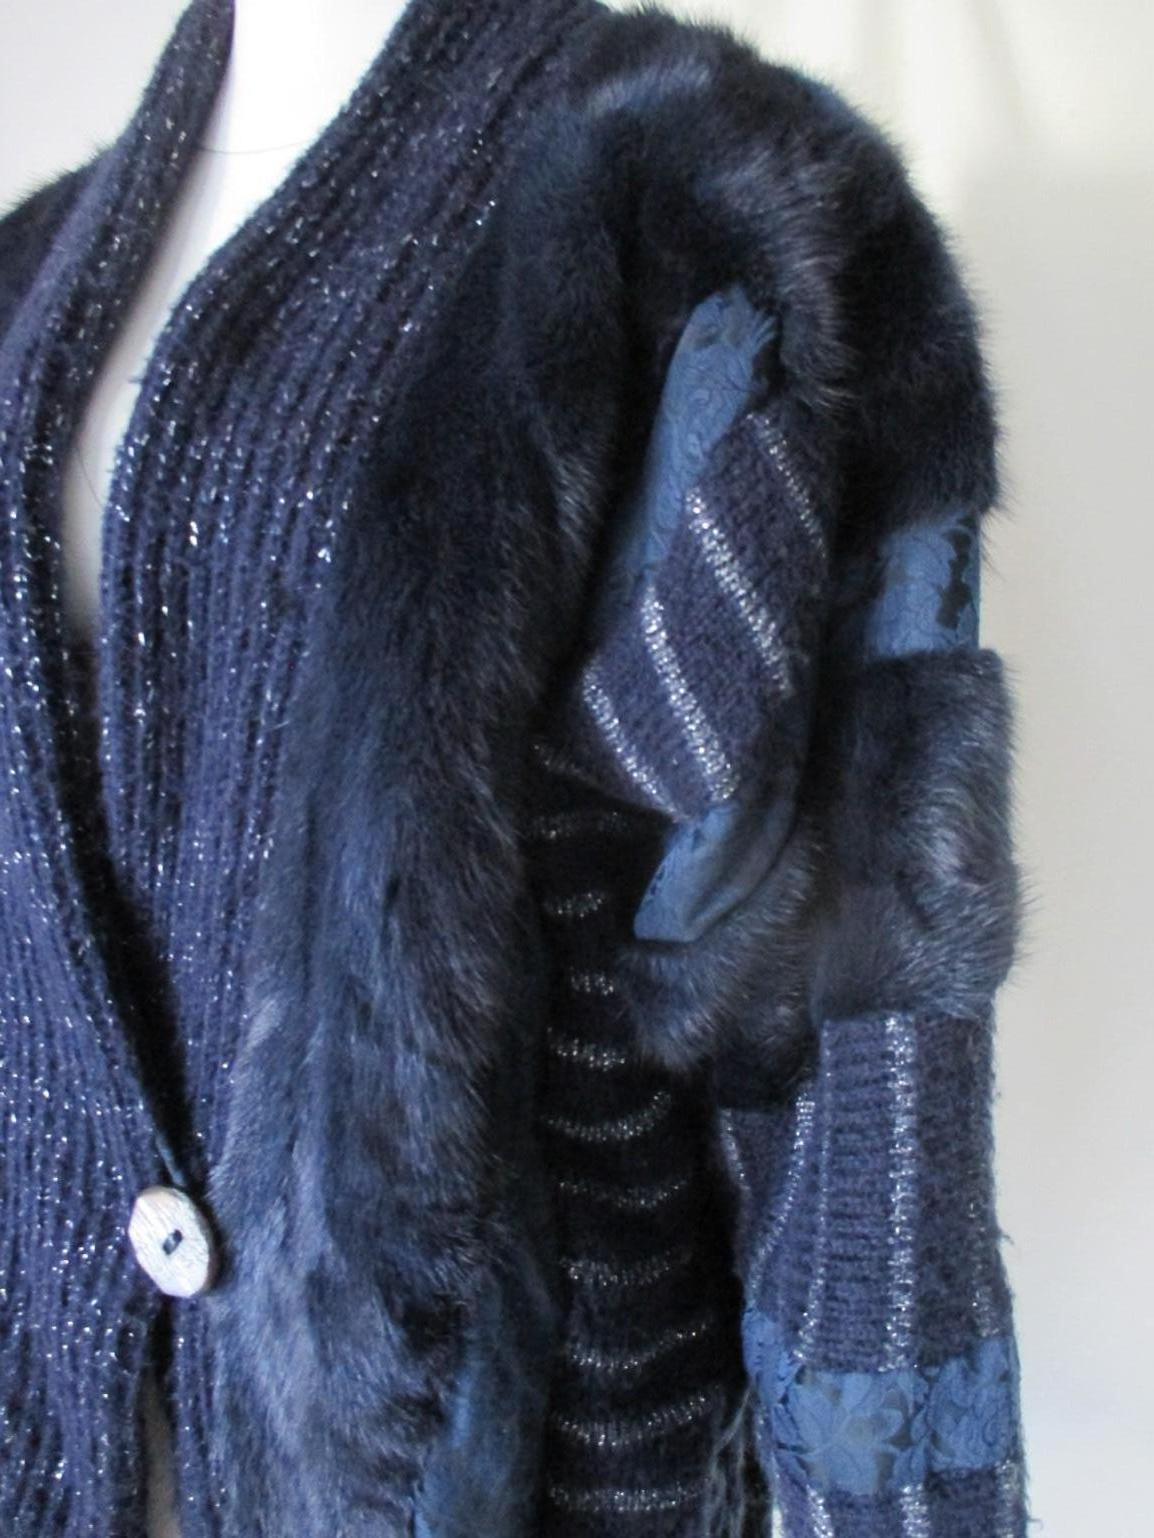 Fabulous original vintage 80/90s wool coat embroidered with silver / blue wool and blue dyed mink fur with 1 button closure and 2 pockets.
Good pre-owned condition 
Size fits as medium to large, but can be worn oversized at a smaller person, see